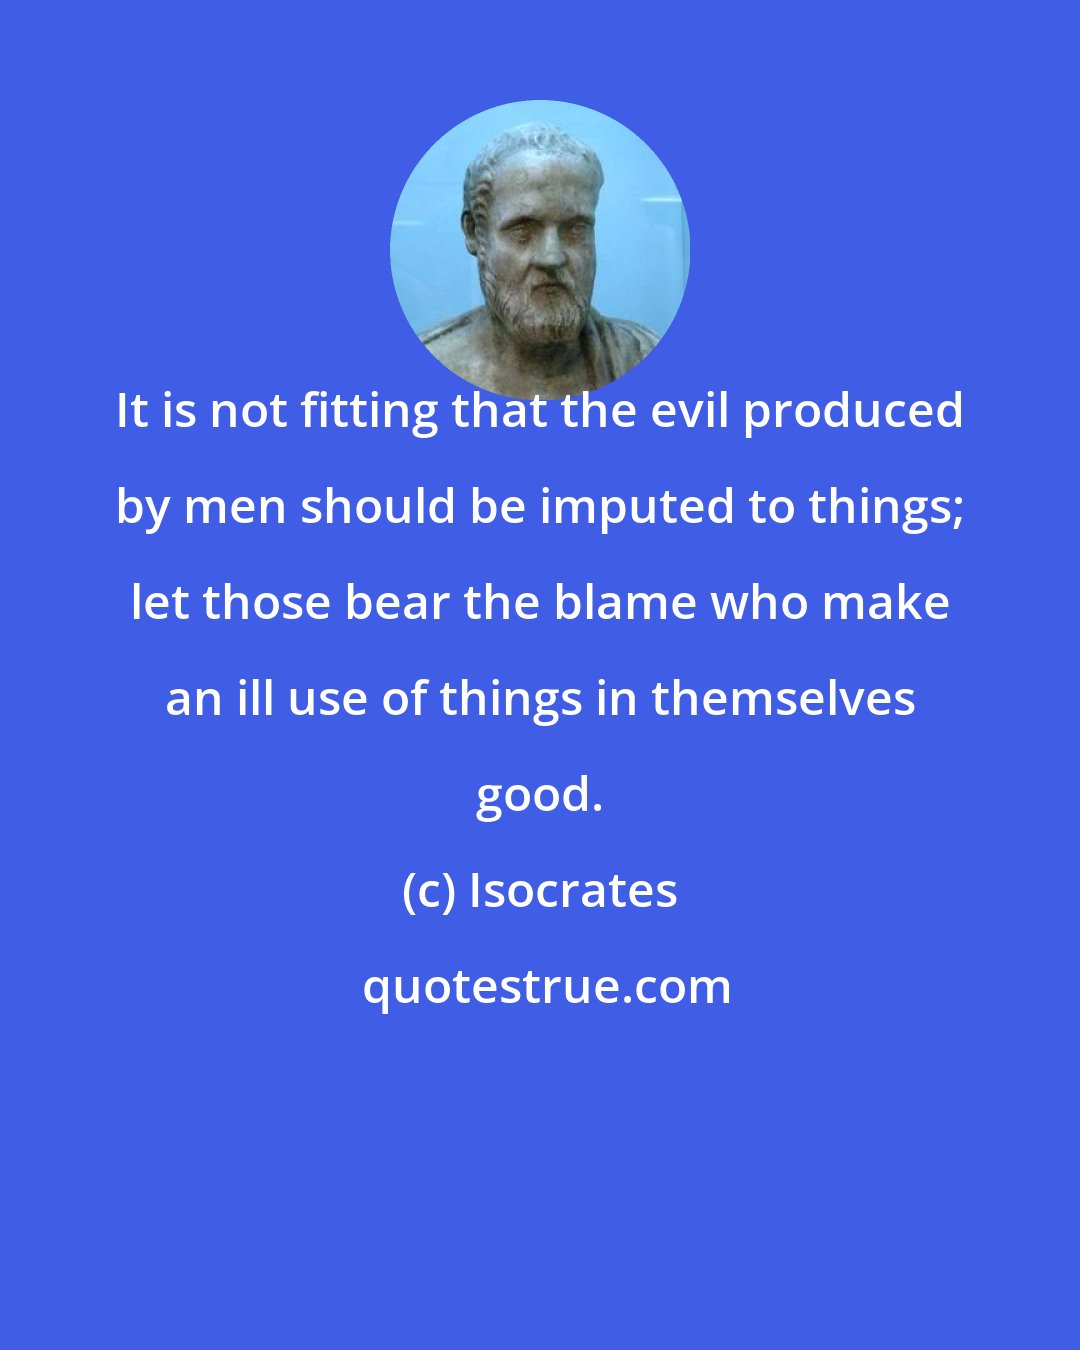 Isocrates: It is not fitting that the evil produced by men should be imputed to things; let those bear the blame who make an ill use of things in themselves good.